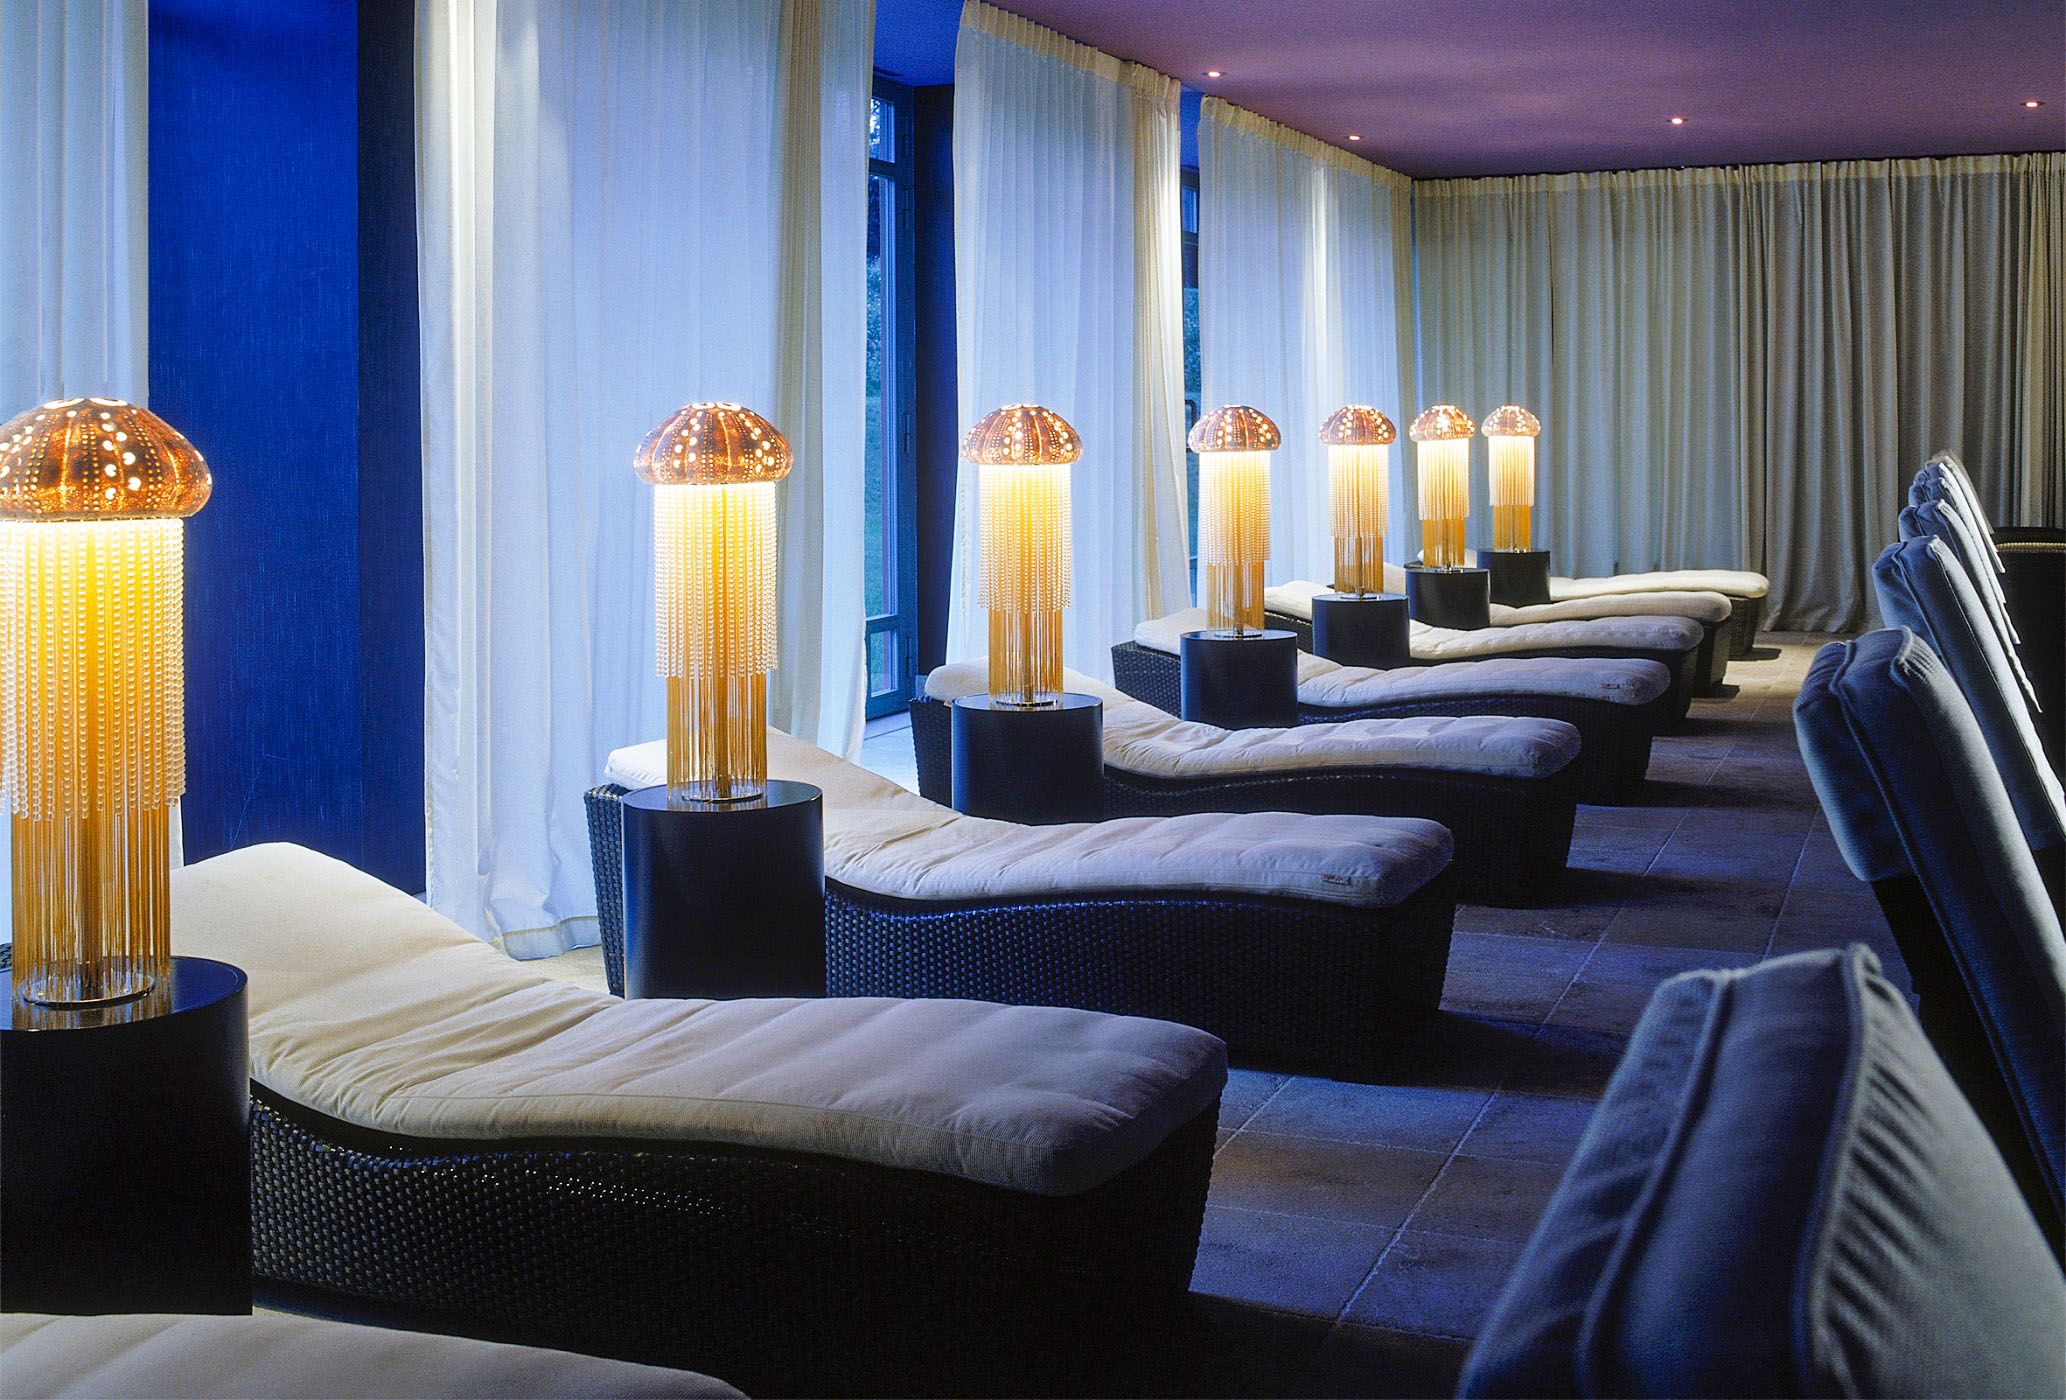 NEW WORLD CLASS LUXURY SPA DESTINATION: THE SPA AT SÉC-HE NOW OPEN